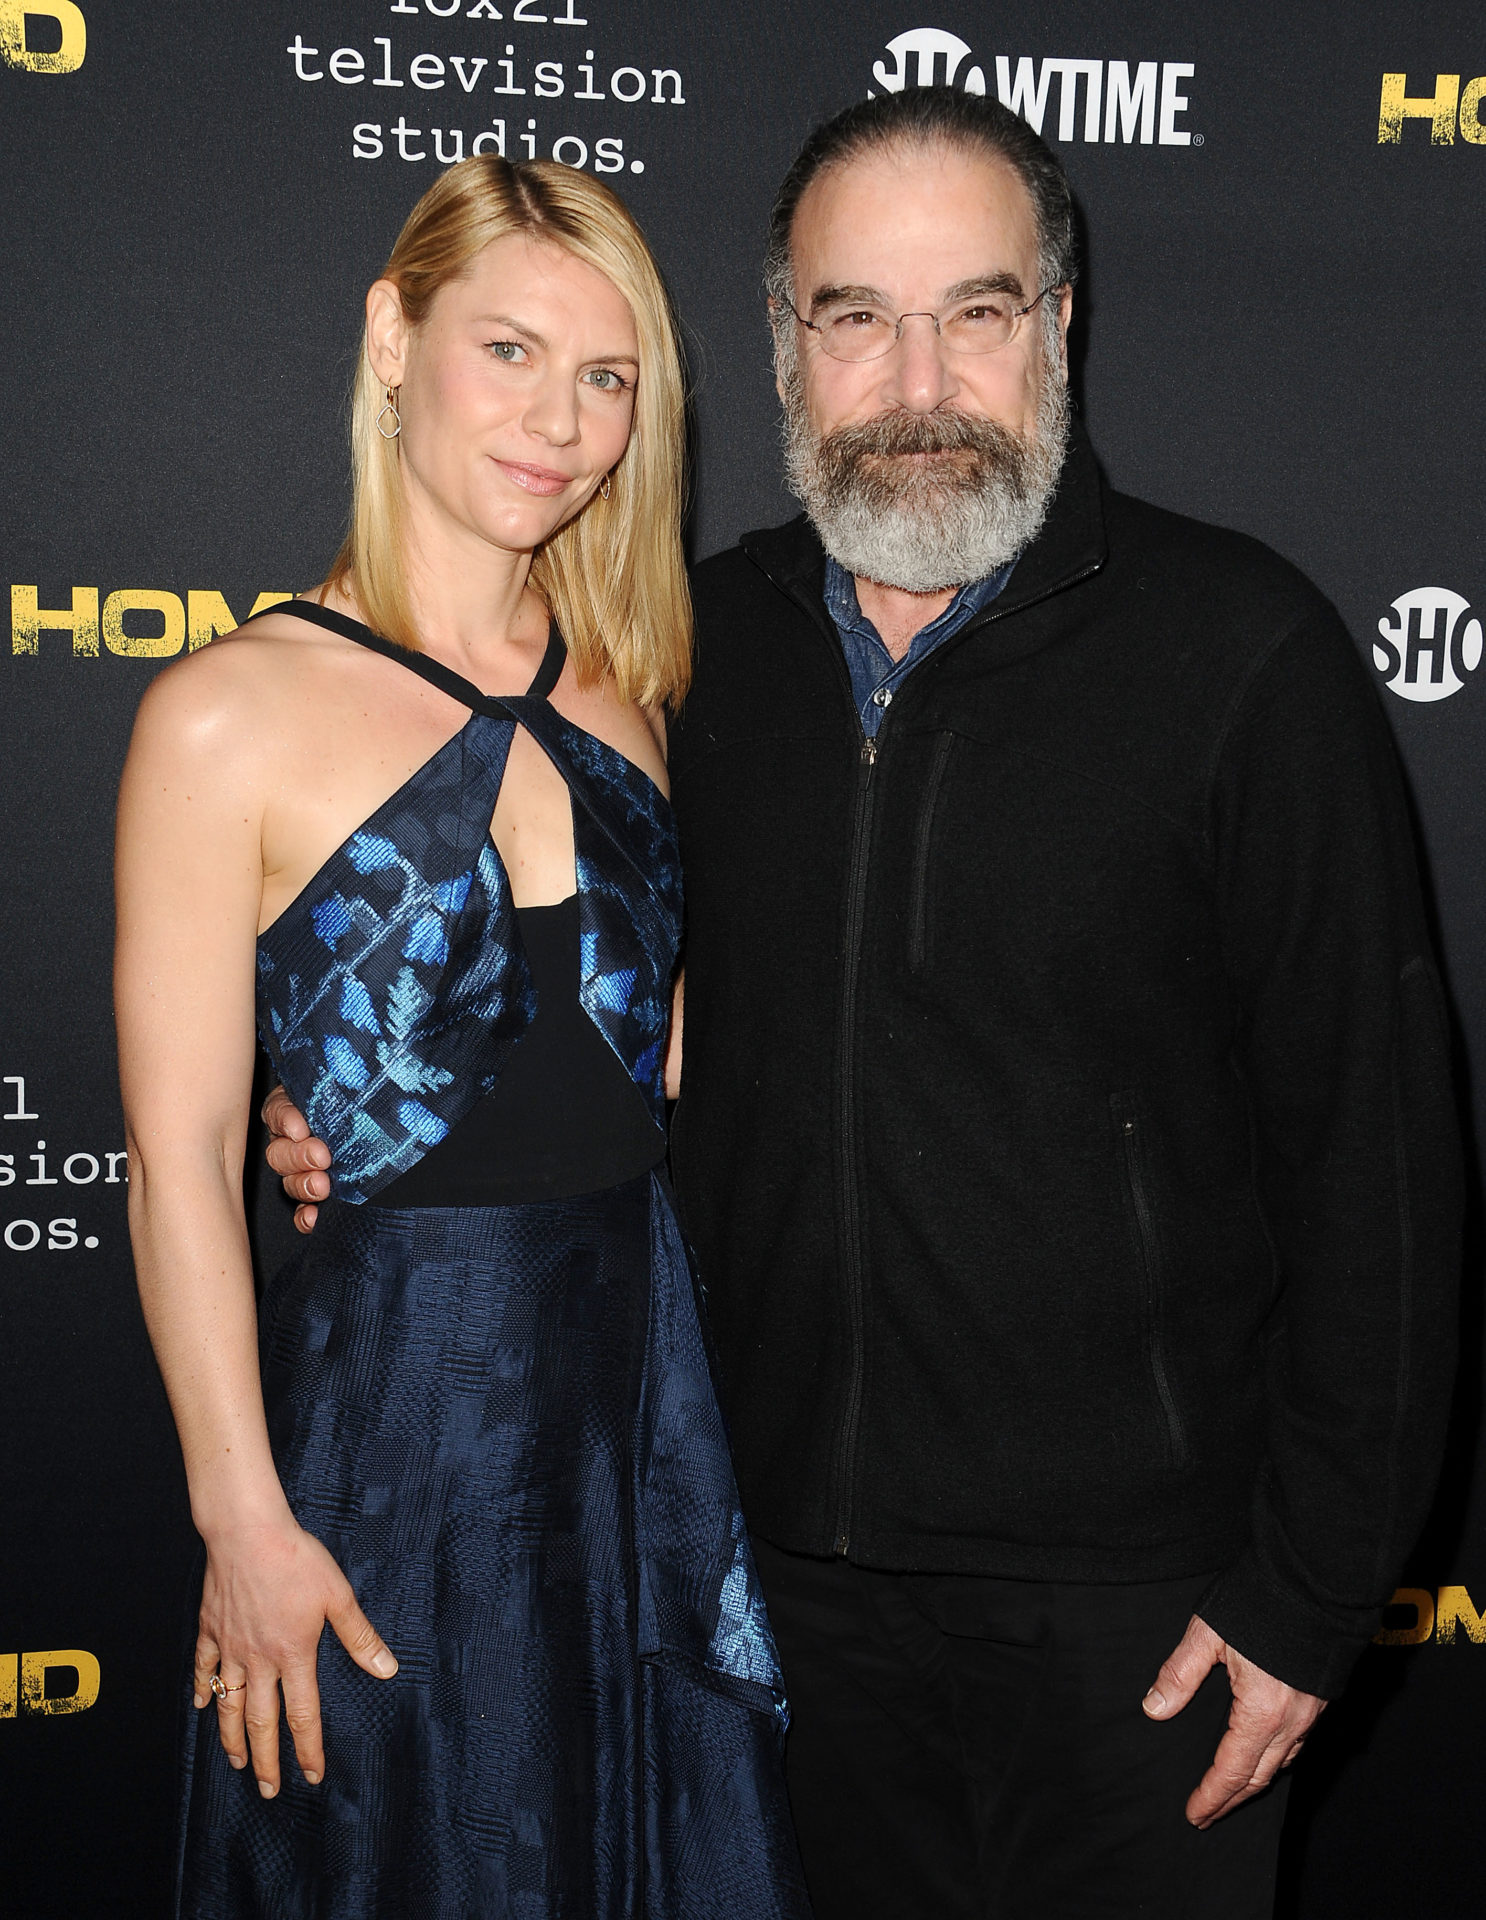 ATAS Emmy Screening Of Showtime's "Homeland" - Arrivals